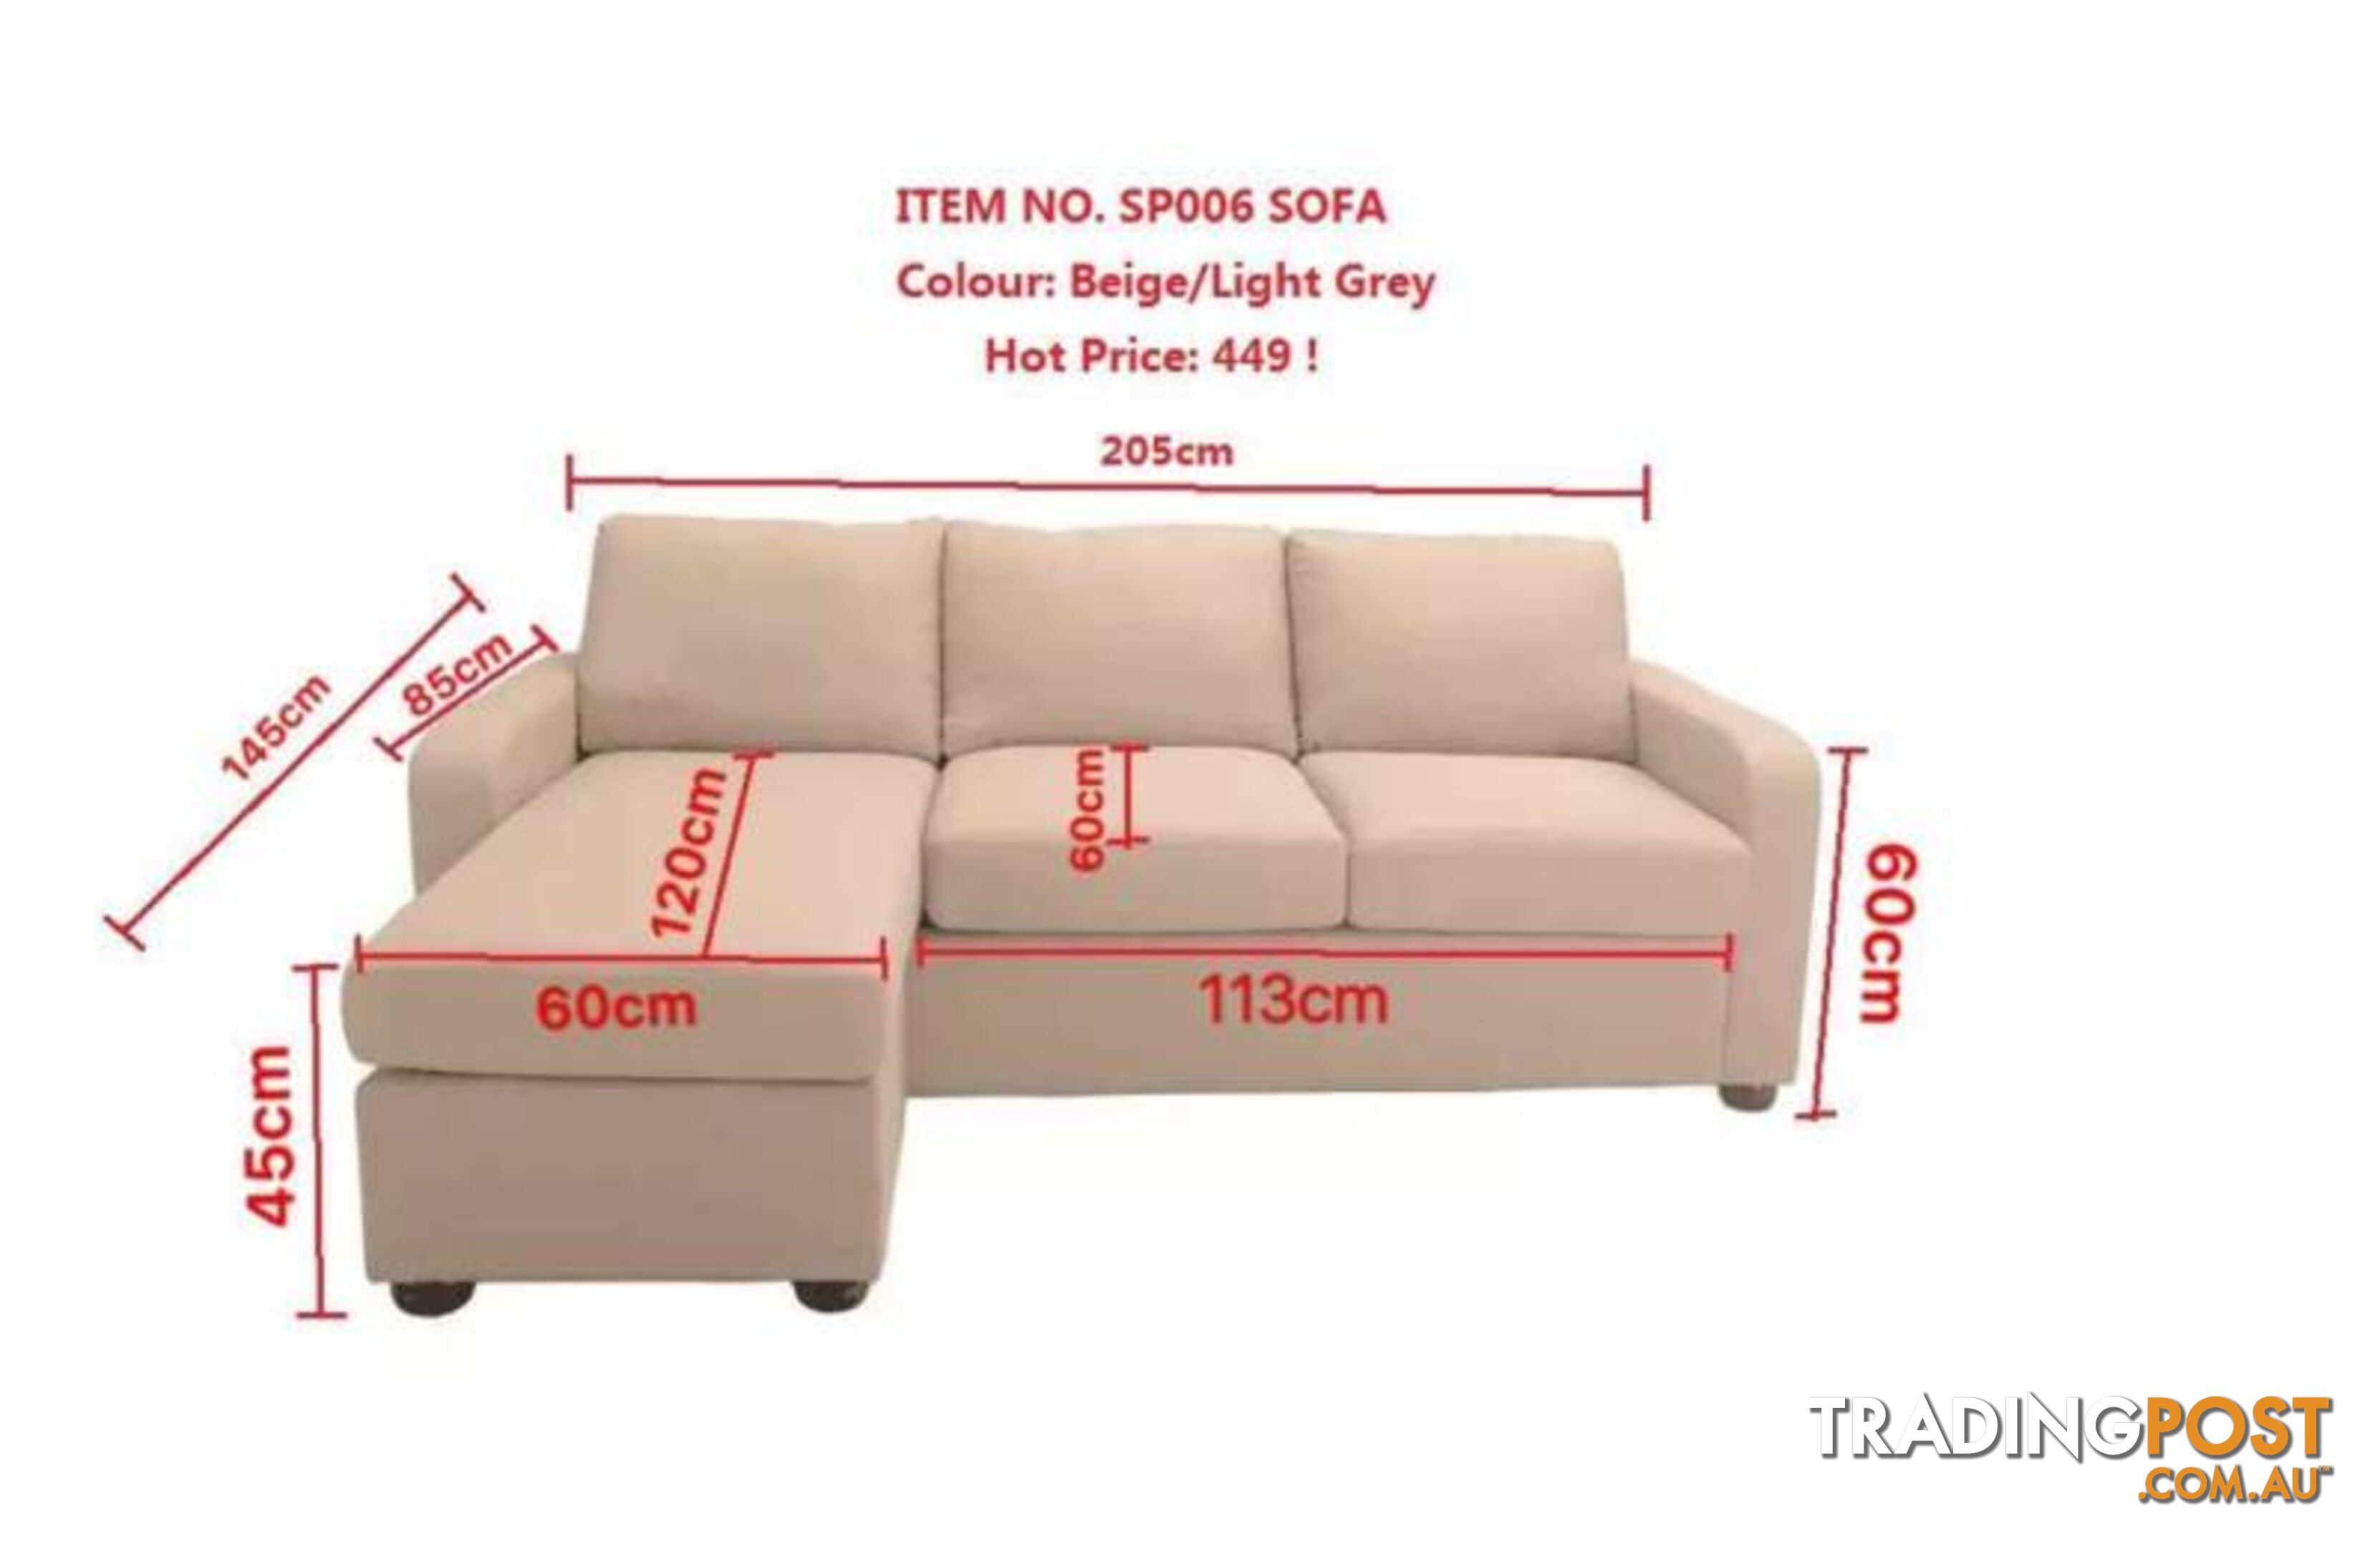 Brand New Fabric Sofa with chaise/ottoman Beige/Grey colour